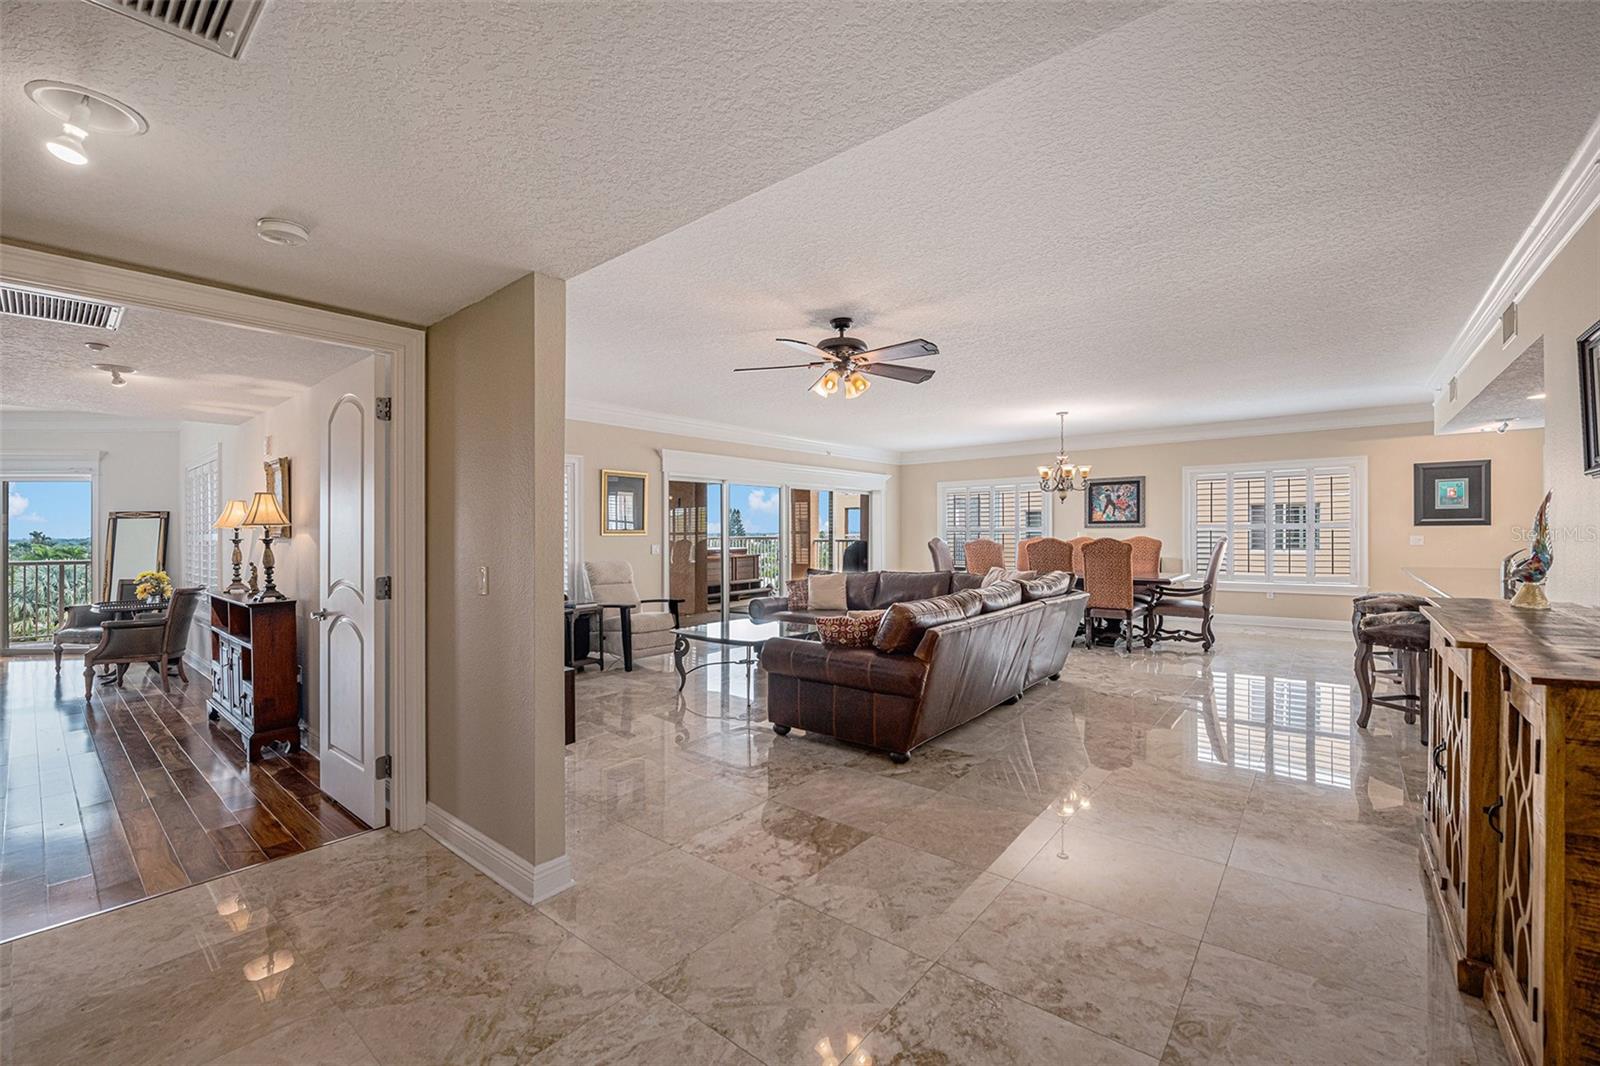 The perfect home to entertain with an open countertop bar from the kitchen, overlooking the expansive dining room and great room. Enjoy your waterfront views, pool, and boats! Sliding doors open fully to experience Florida breezes and a covered patio with your own private swim spa.